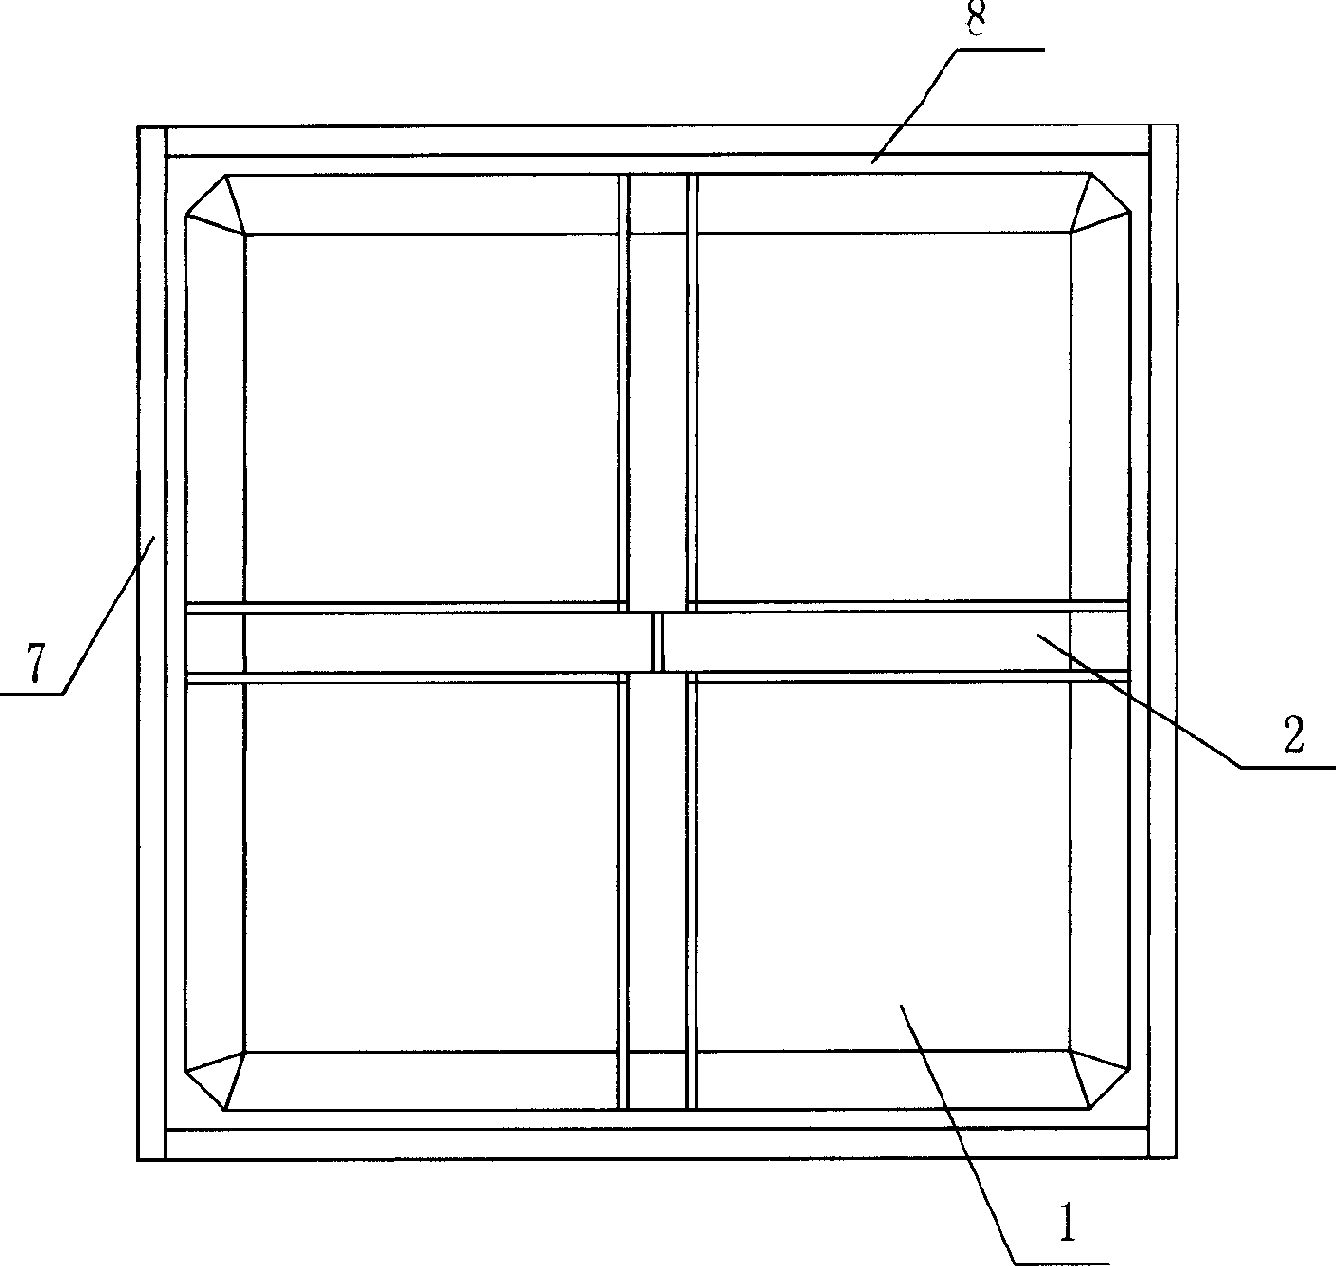 Mold and method for producing open-mouthed concrete box